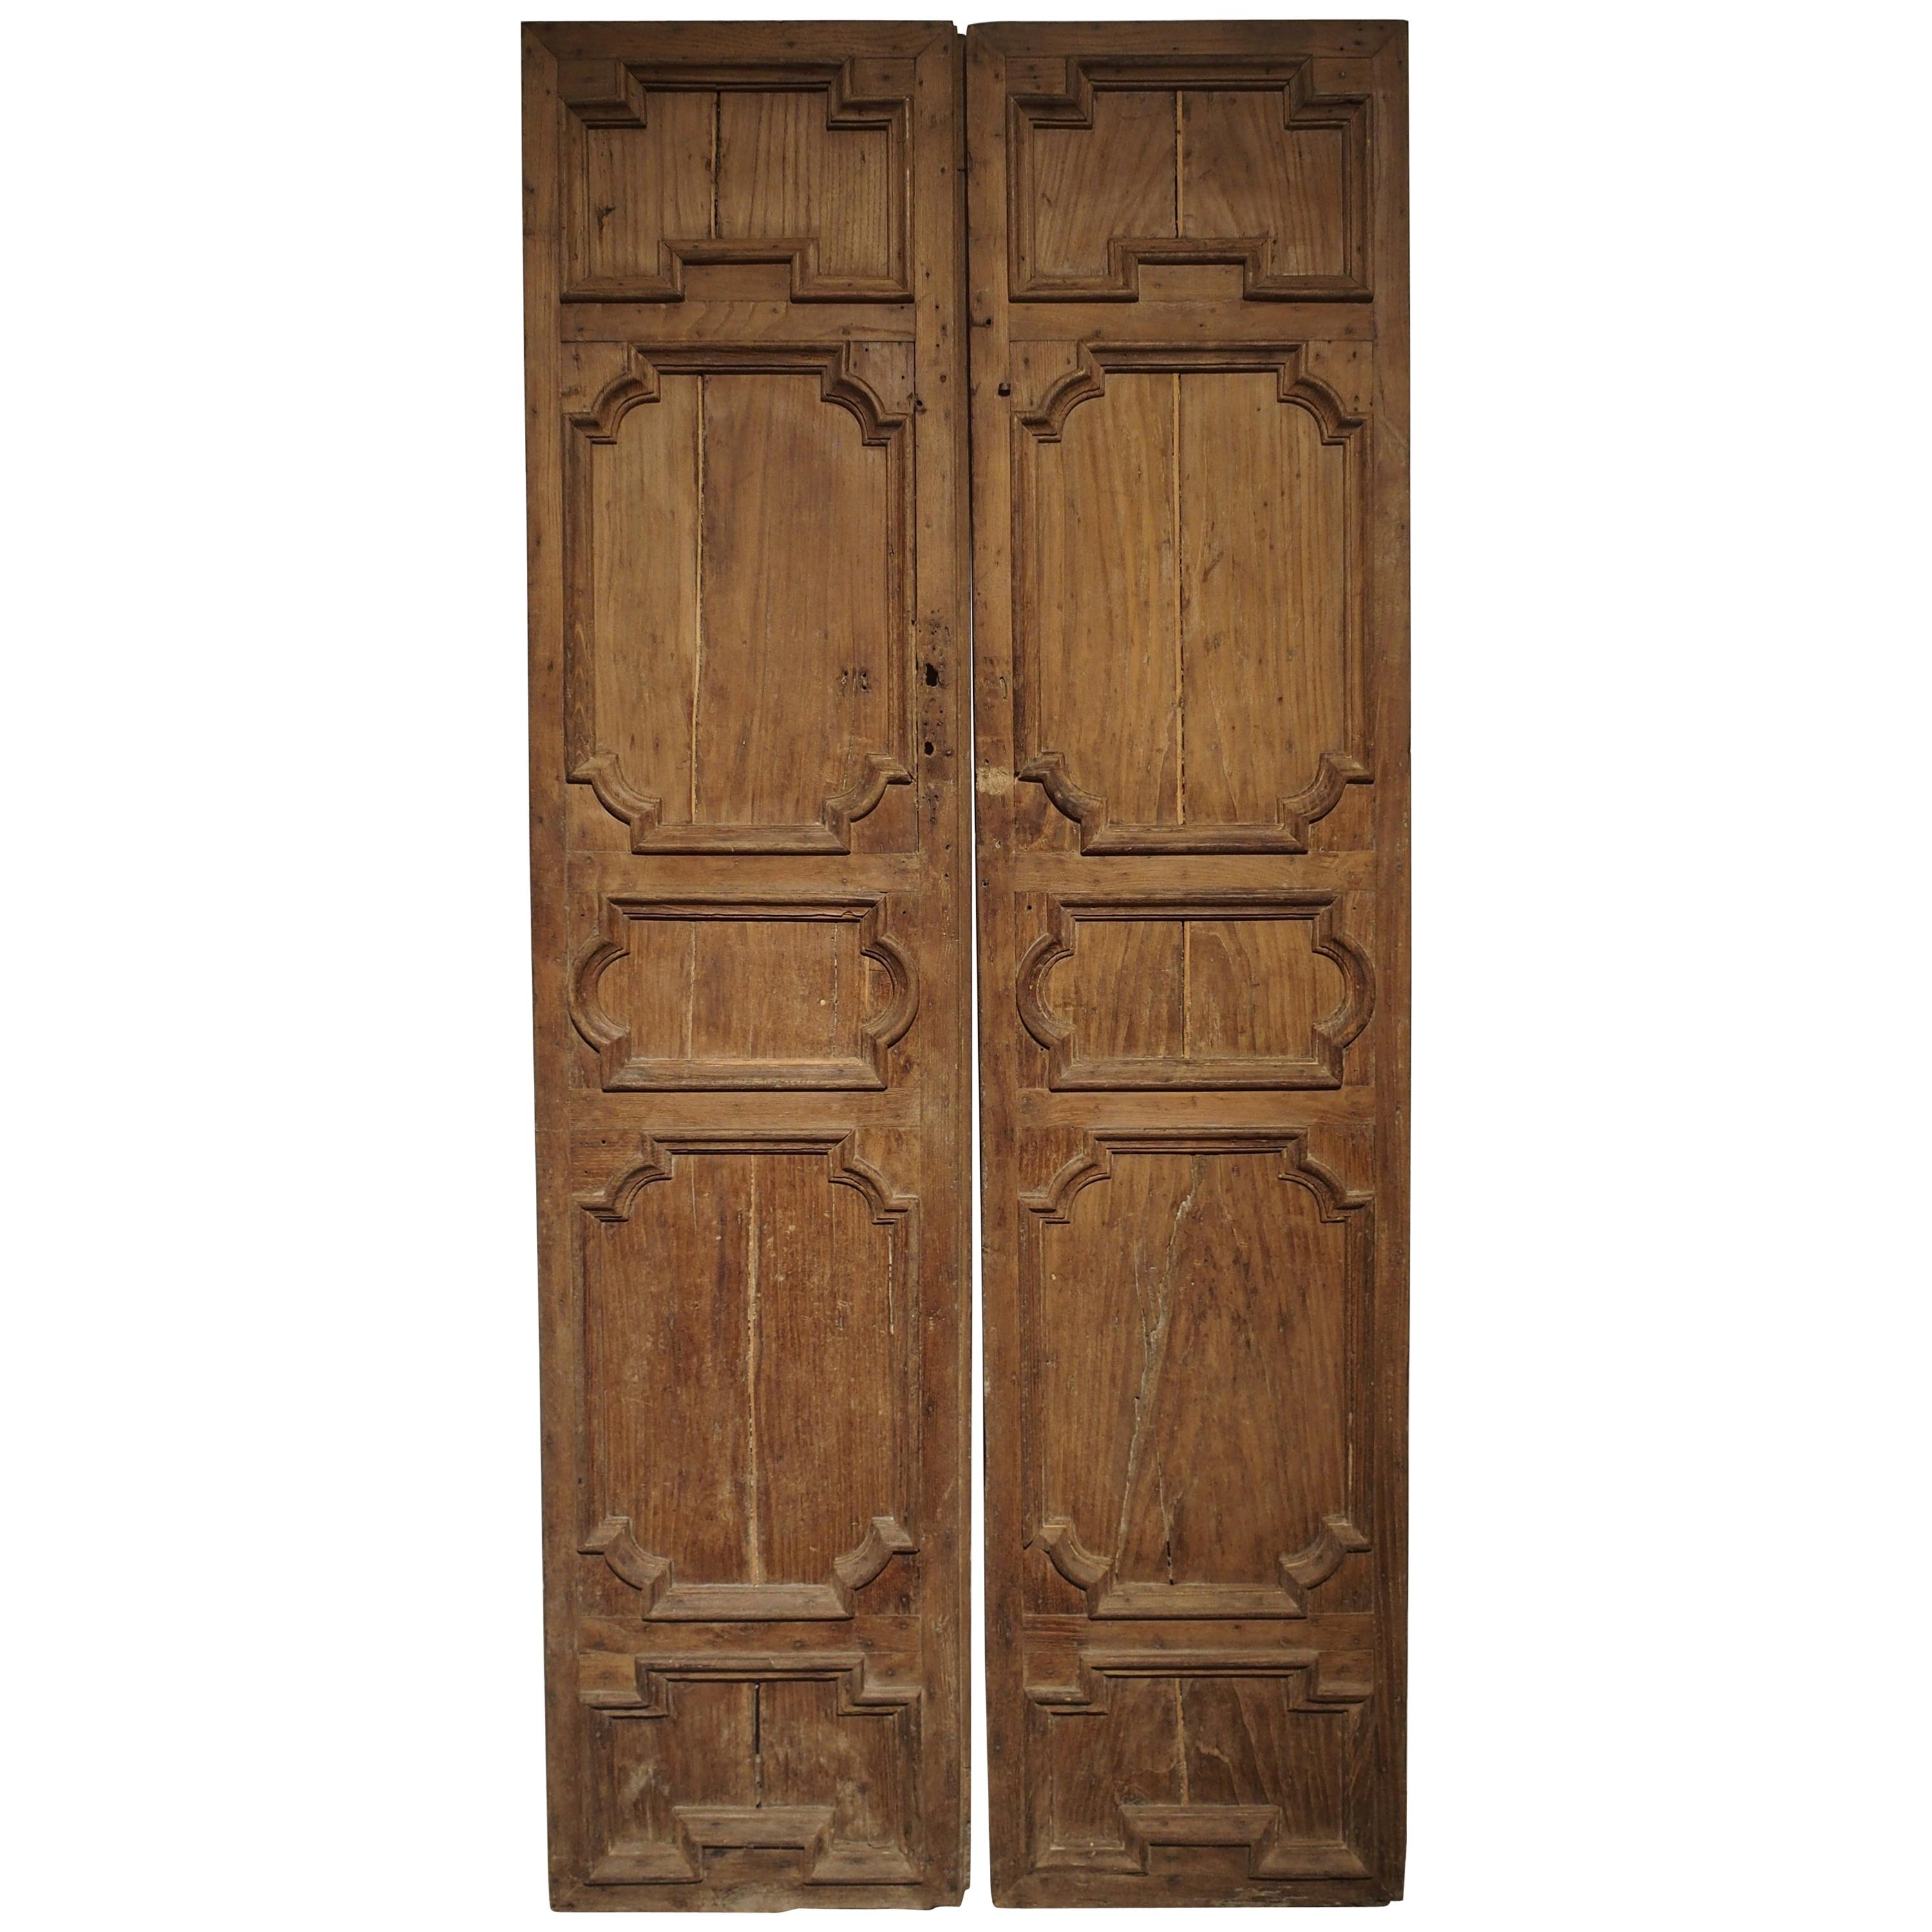 Pair of 17th Century Chestnut Wood Doors from Umbria, Italy